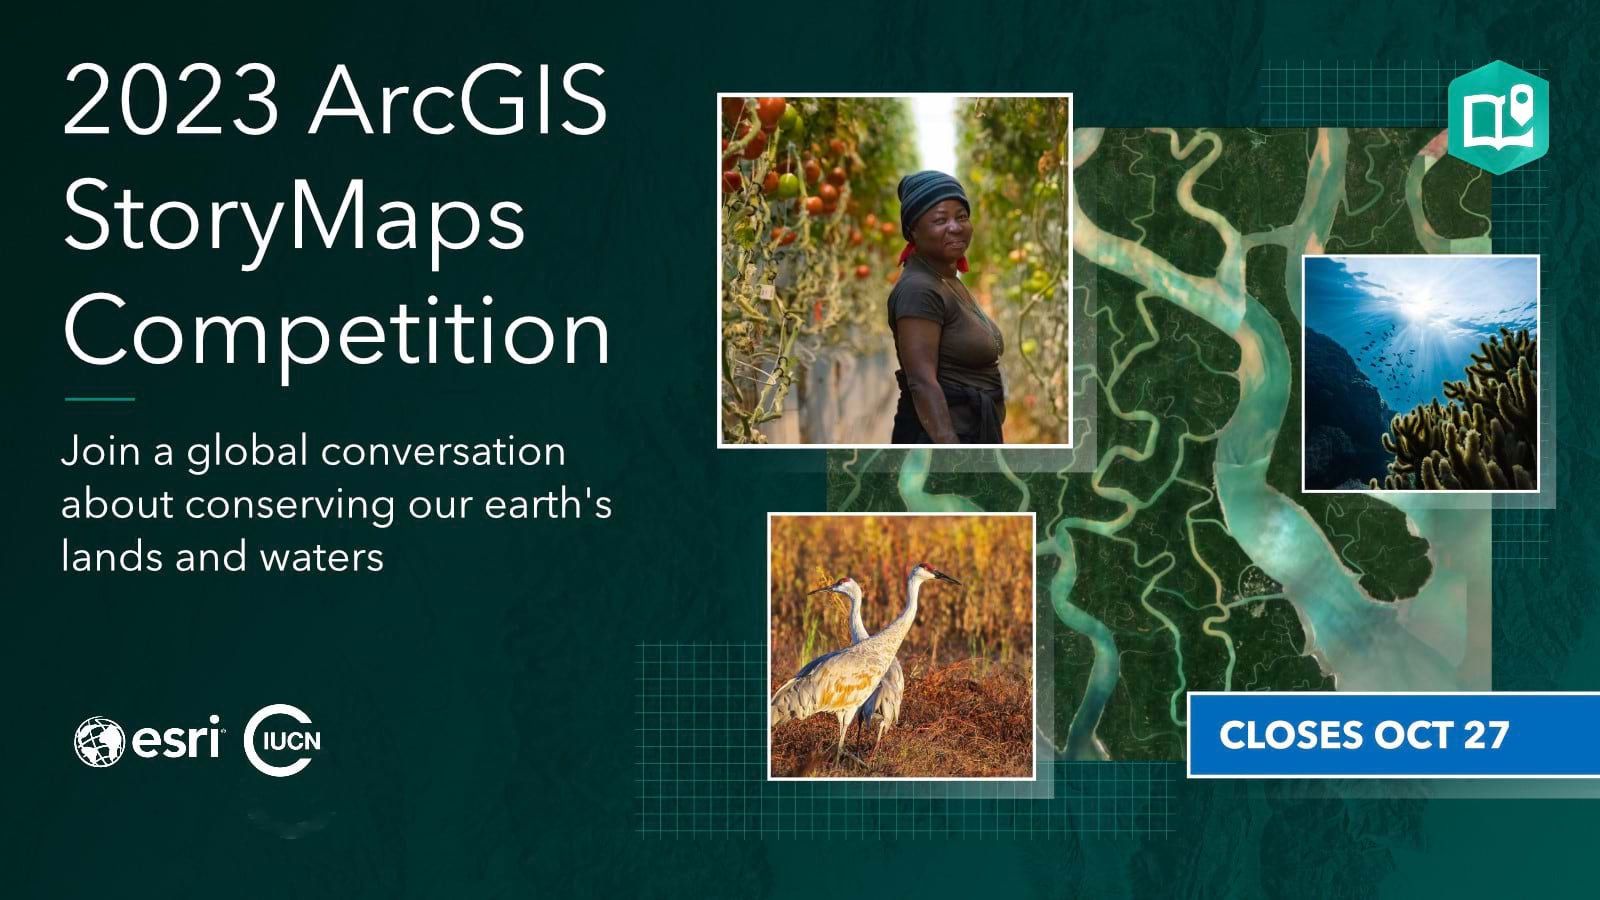 Social media image for the 2023 ArcGIS StoryMaps Compeition that closes on October 27, 2023